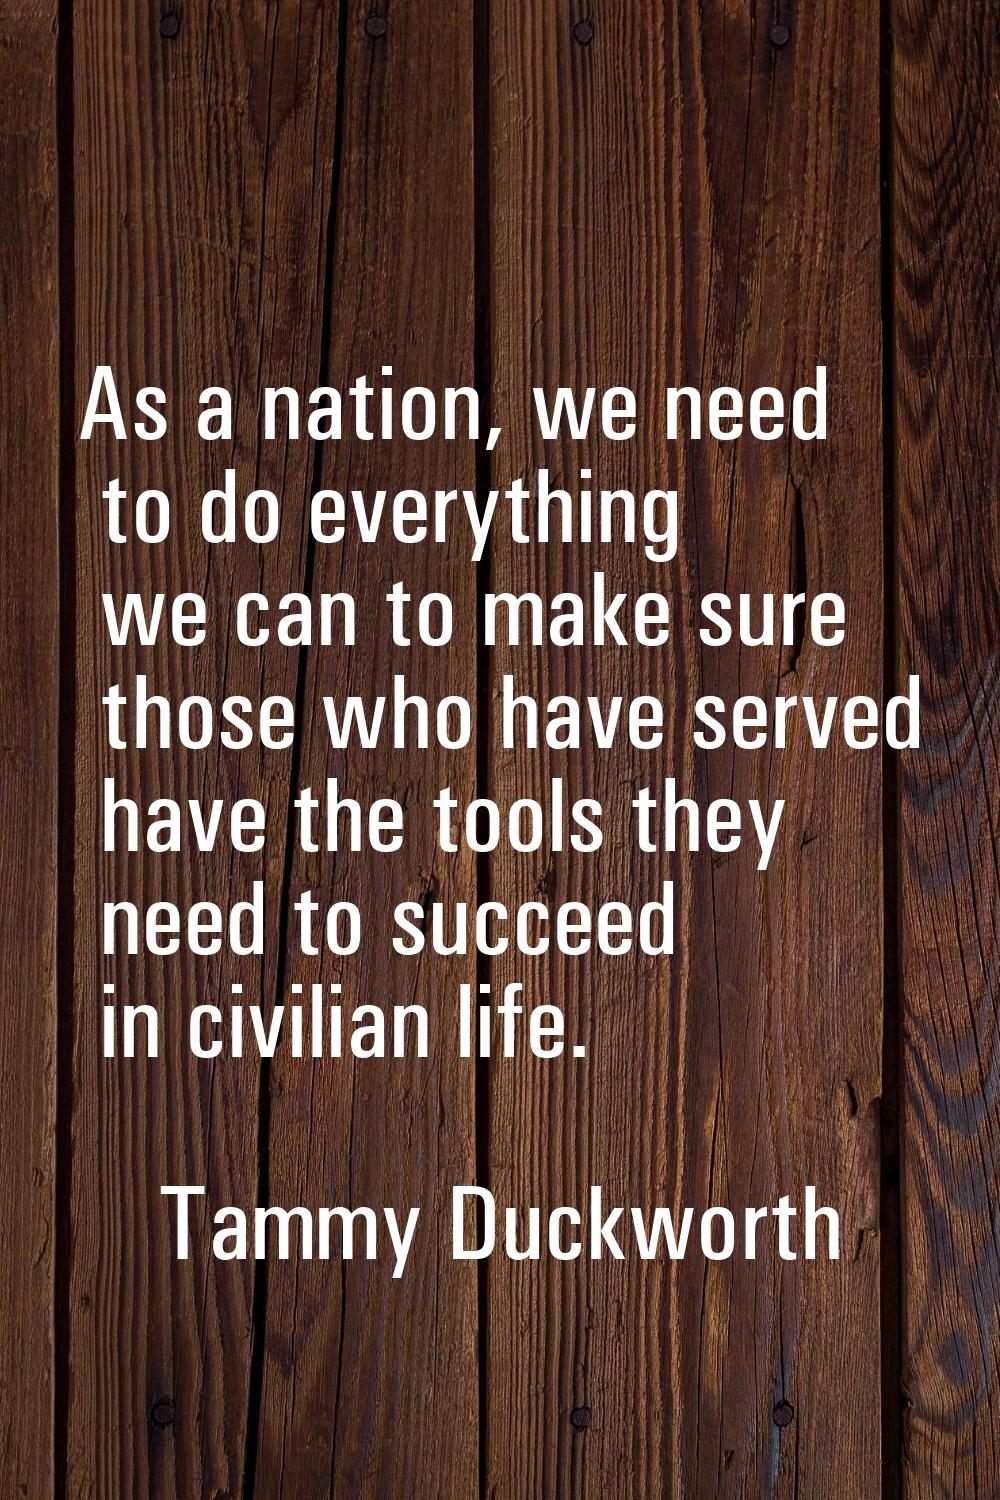 As a nation, we need to do everything we can to make sure those who have served have the tools they